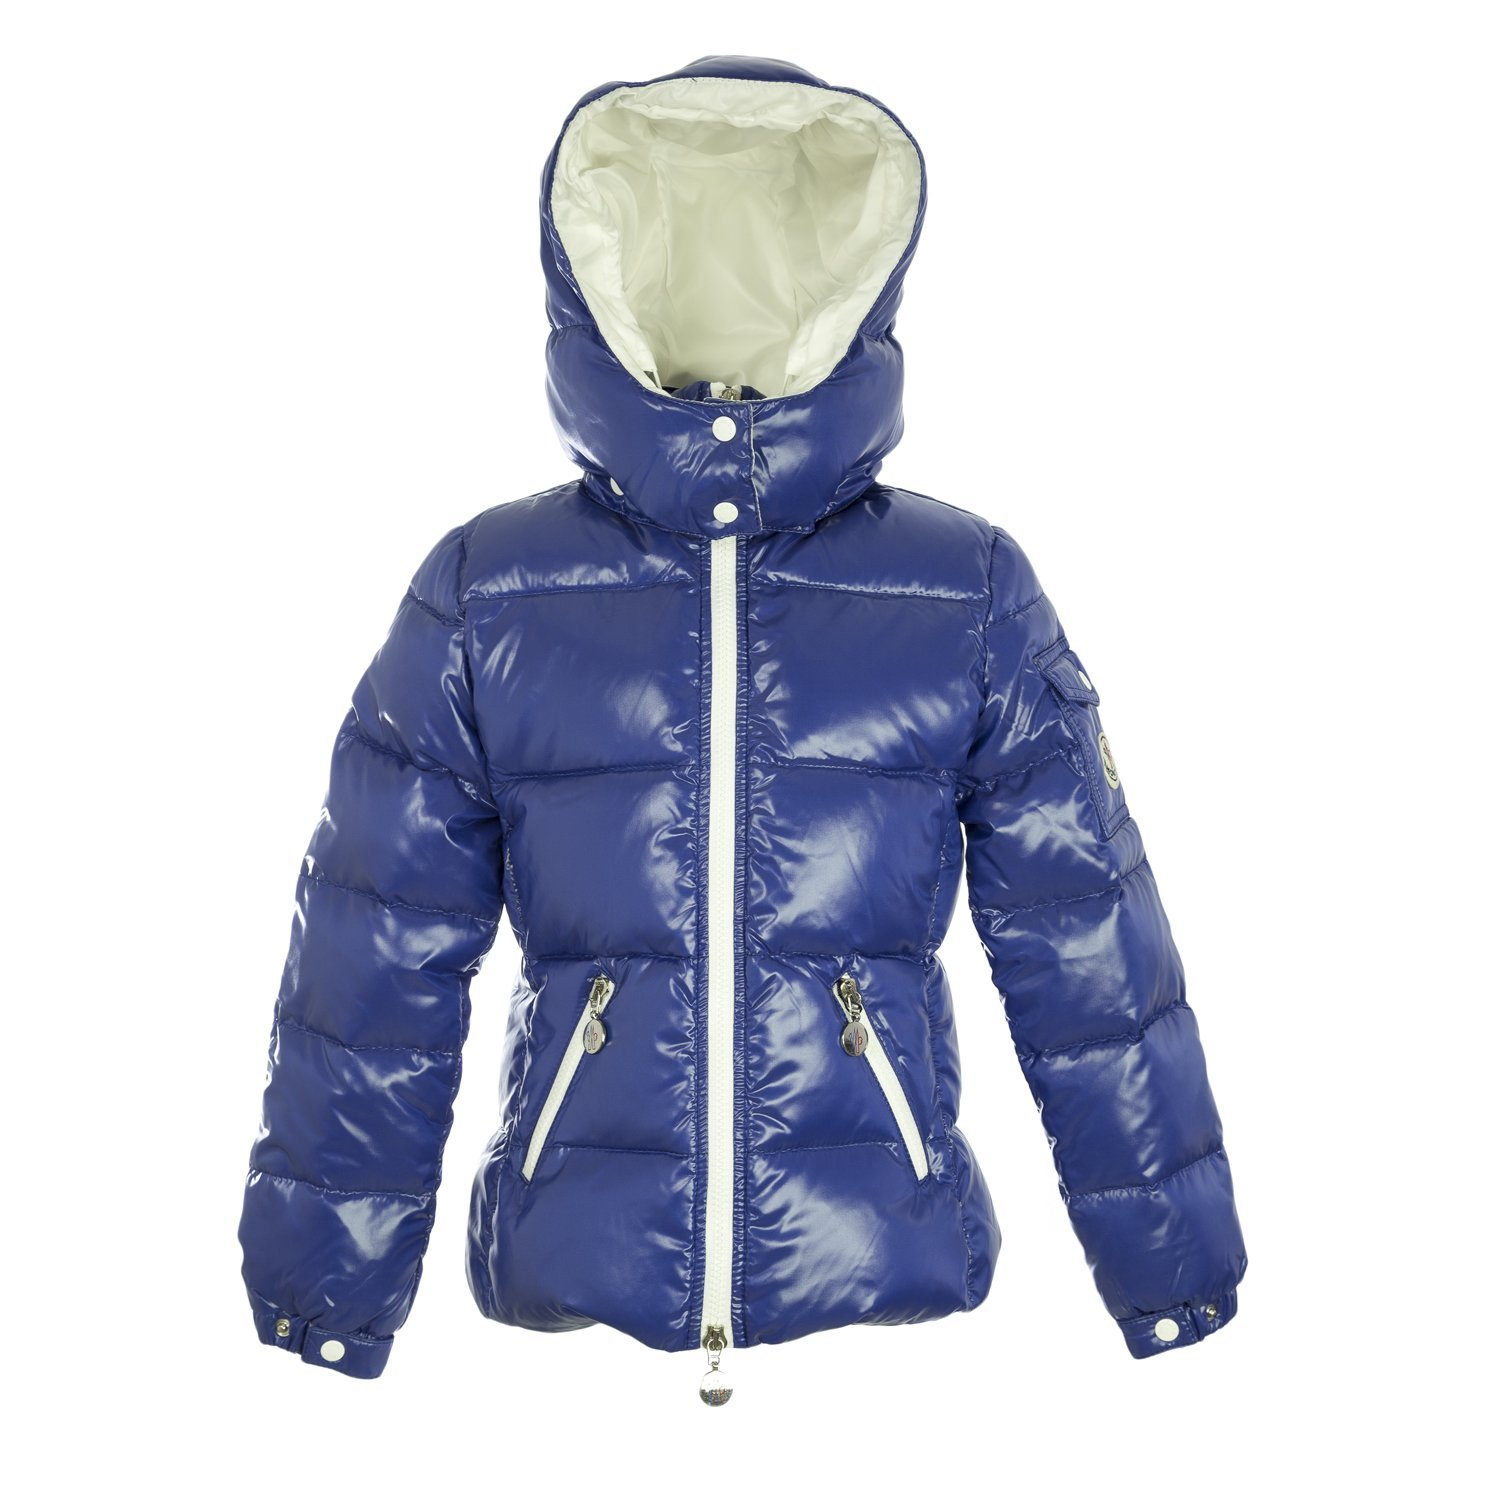 Moncler Kids Girls Bady Hooded Down Puffer Coat | Shopping for your ...